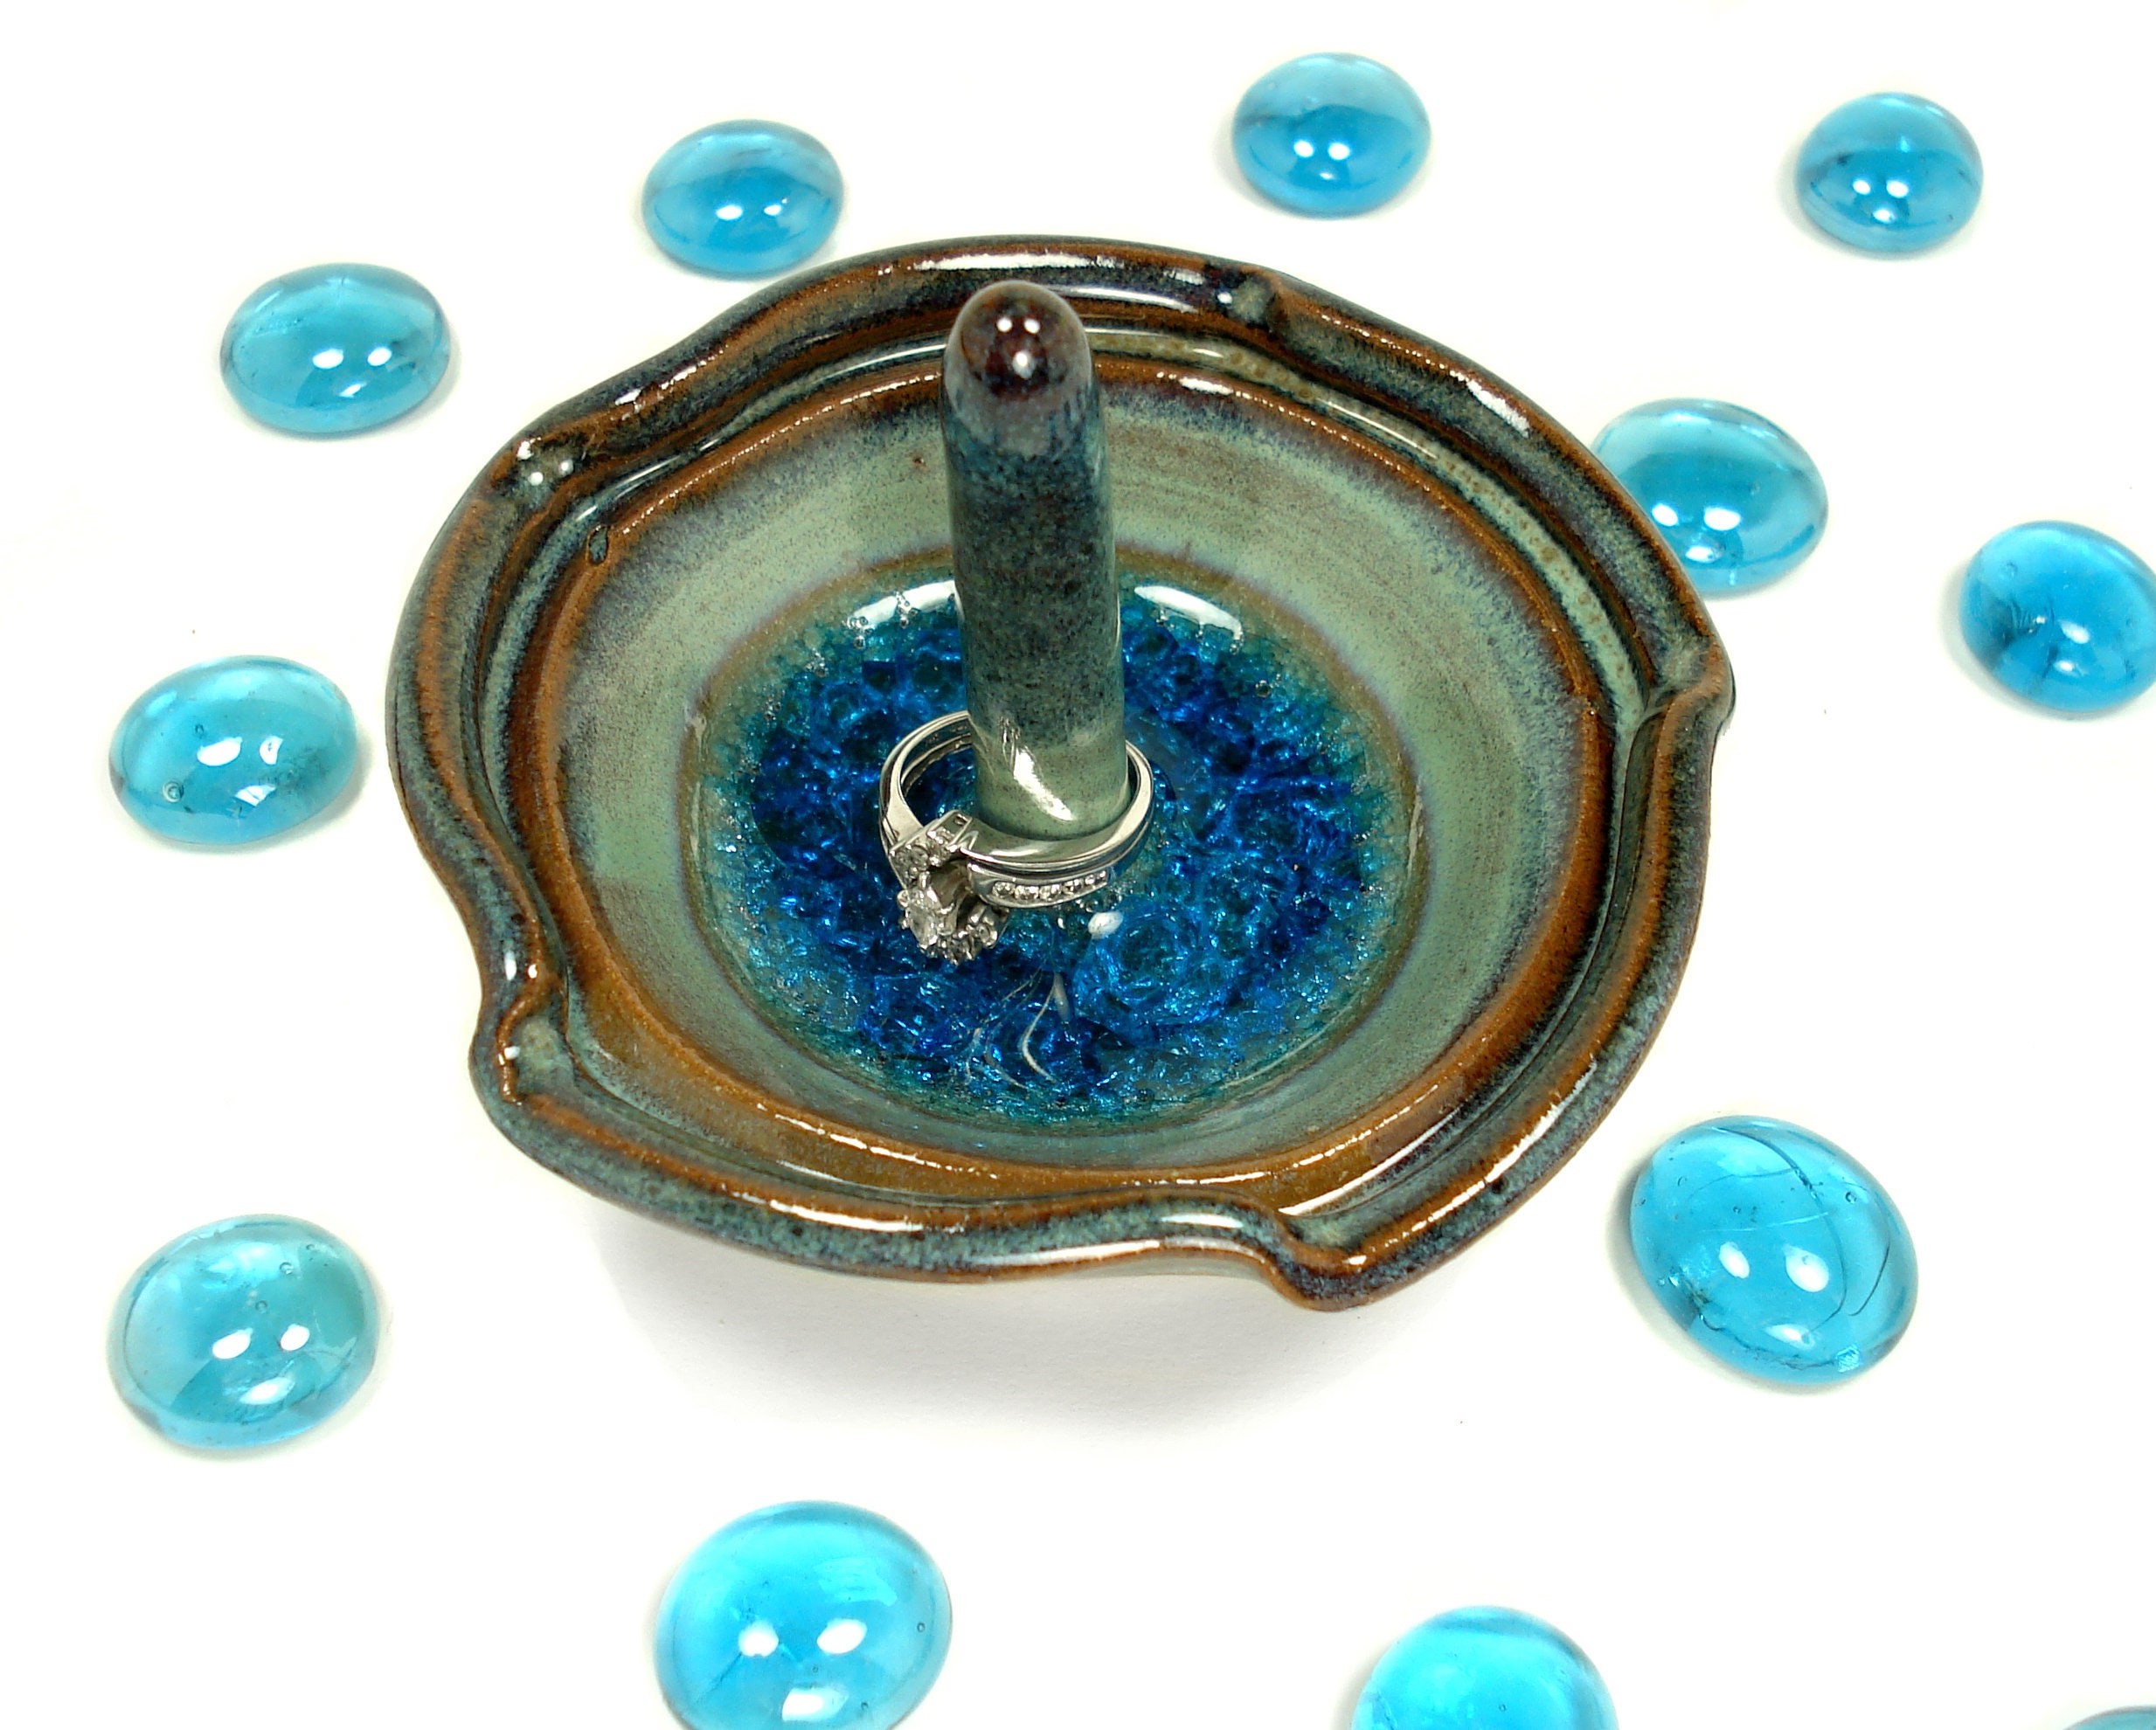 Wheel thrown stoneware Pottery ring holder dish Teal with blue glass